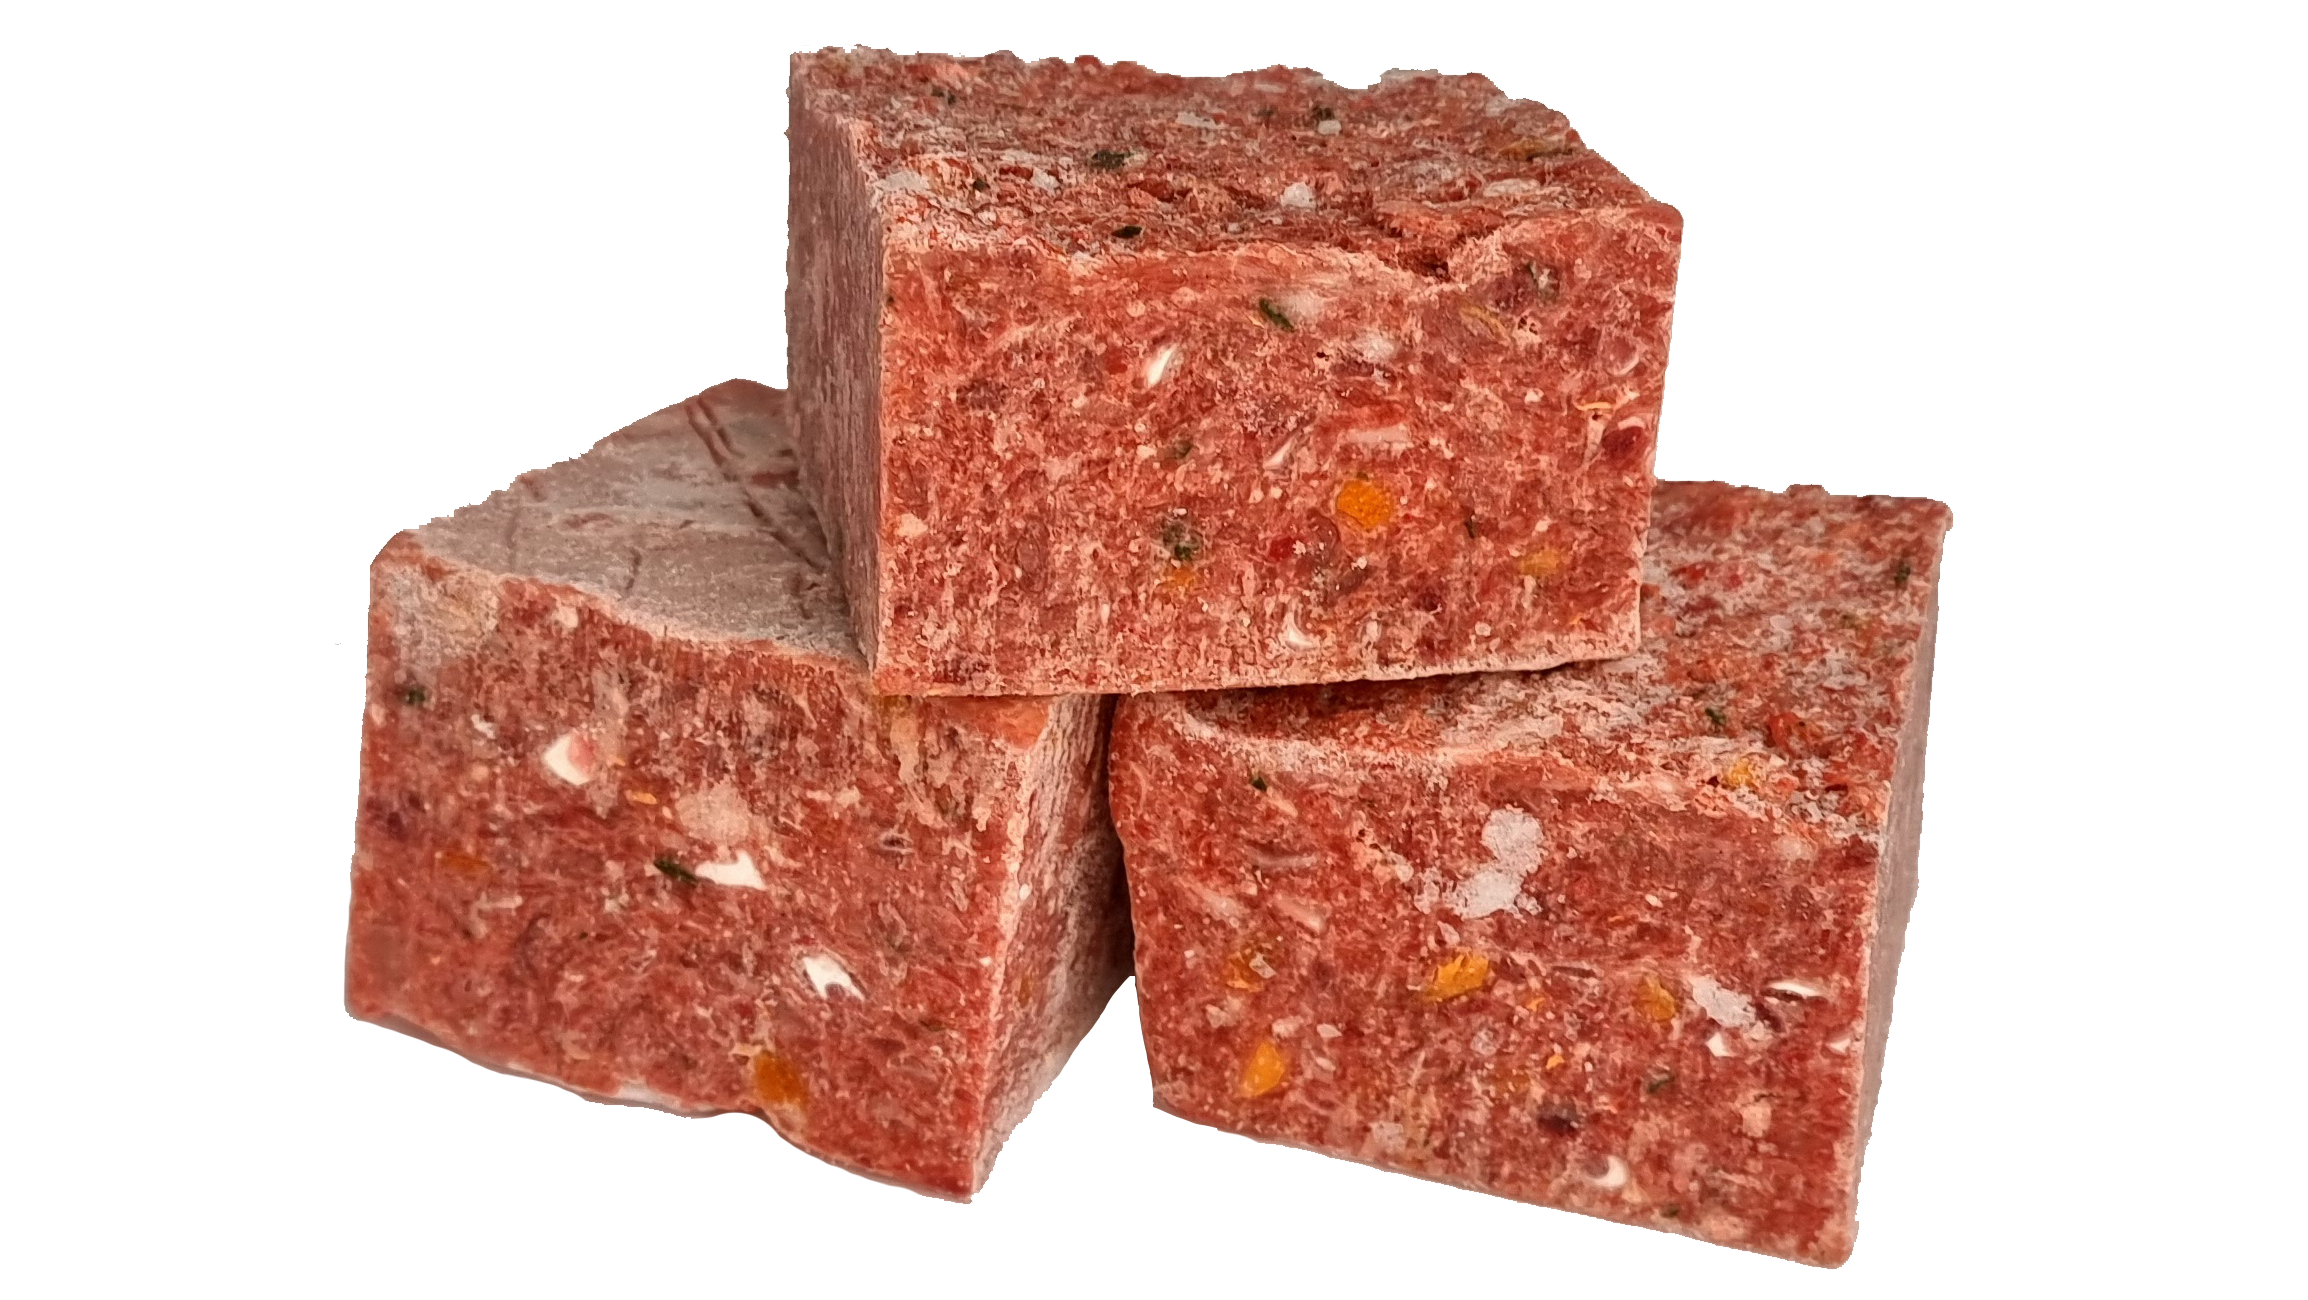 Click & Collect from MALDON - 5kgs Minced Chicken with bone, Carrot, Sweet Potato & Spinach 10 x unwrapped blocks of Raw Frozen Mince